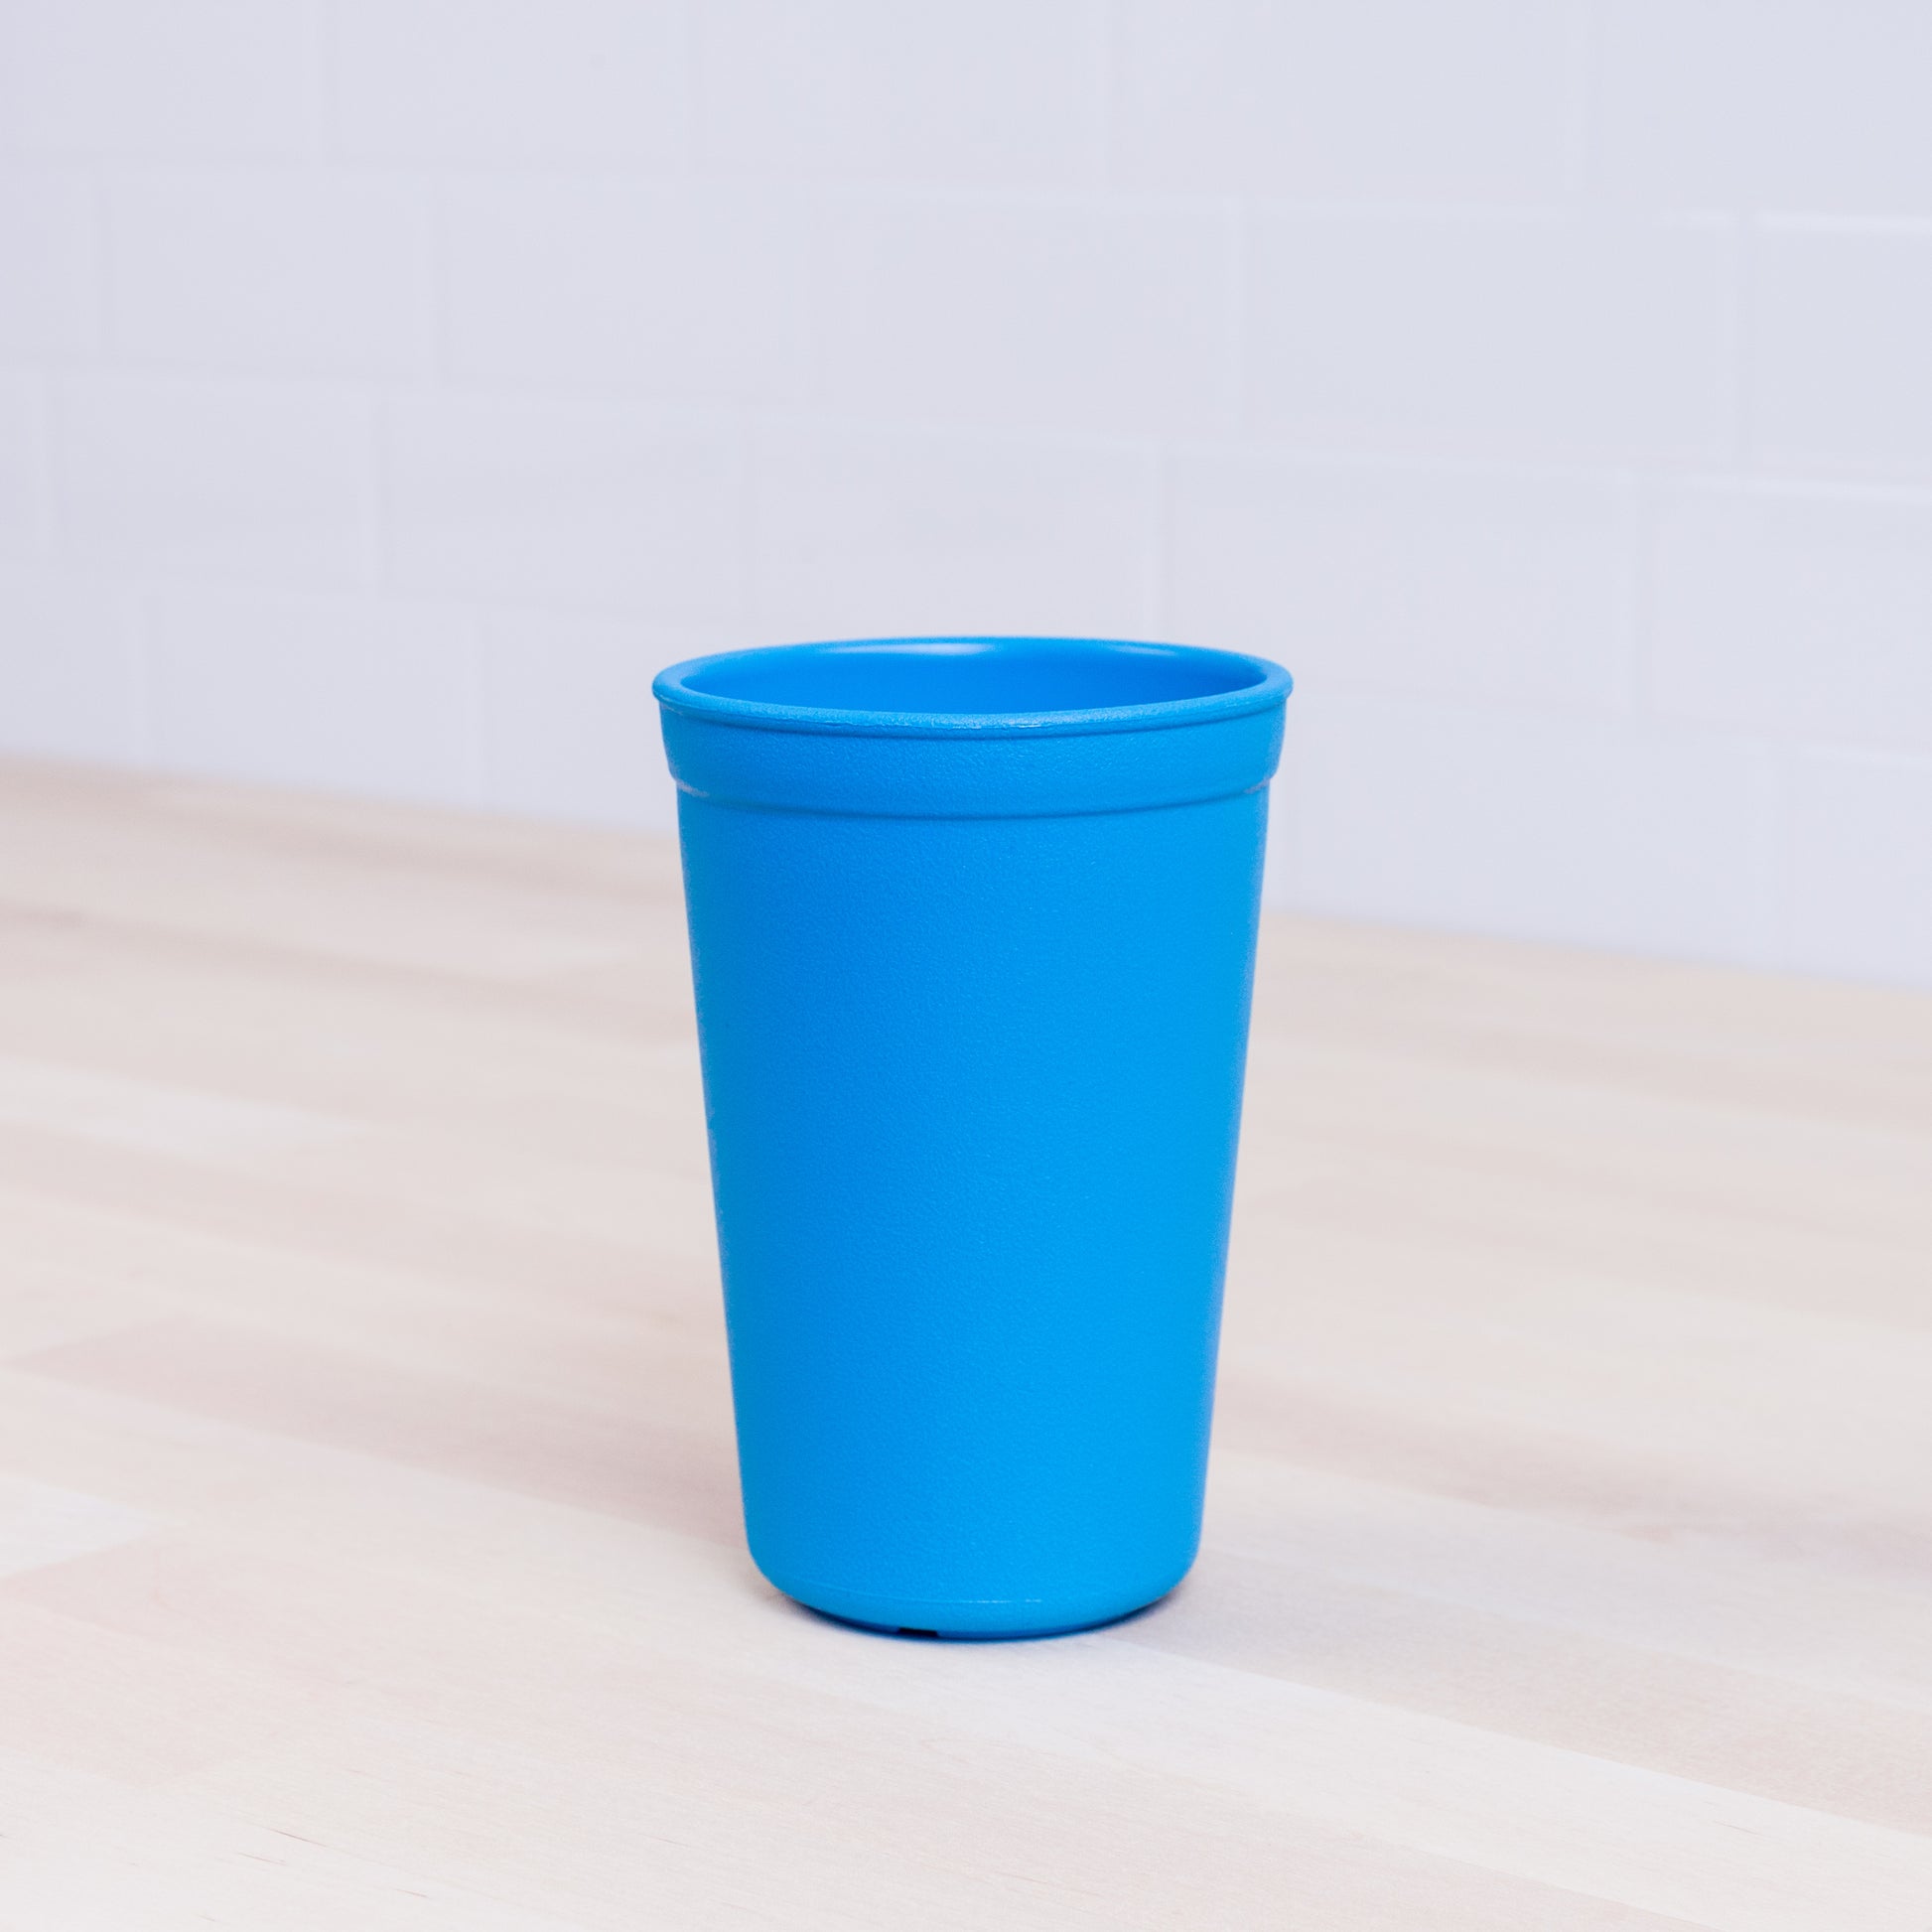 Re-Play Tumbler in Sky Blue from Bear & Moo